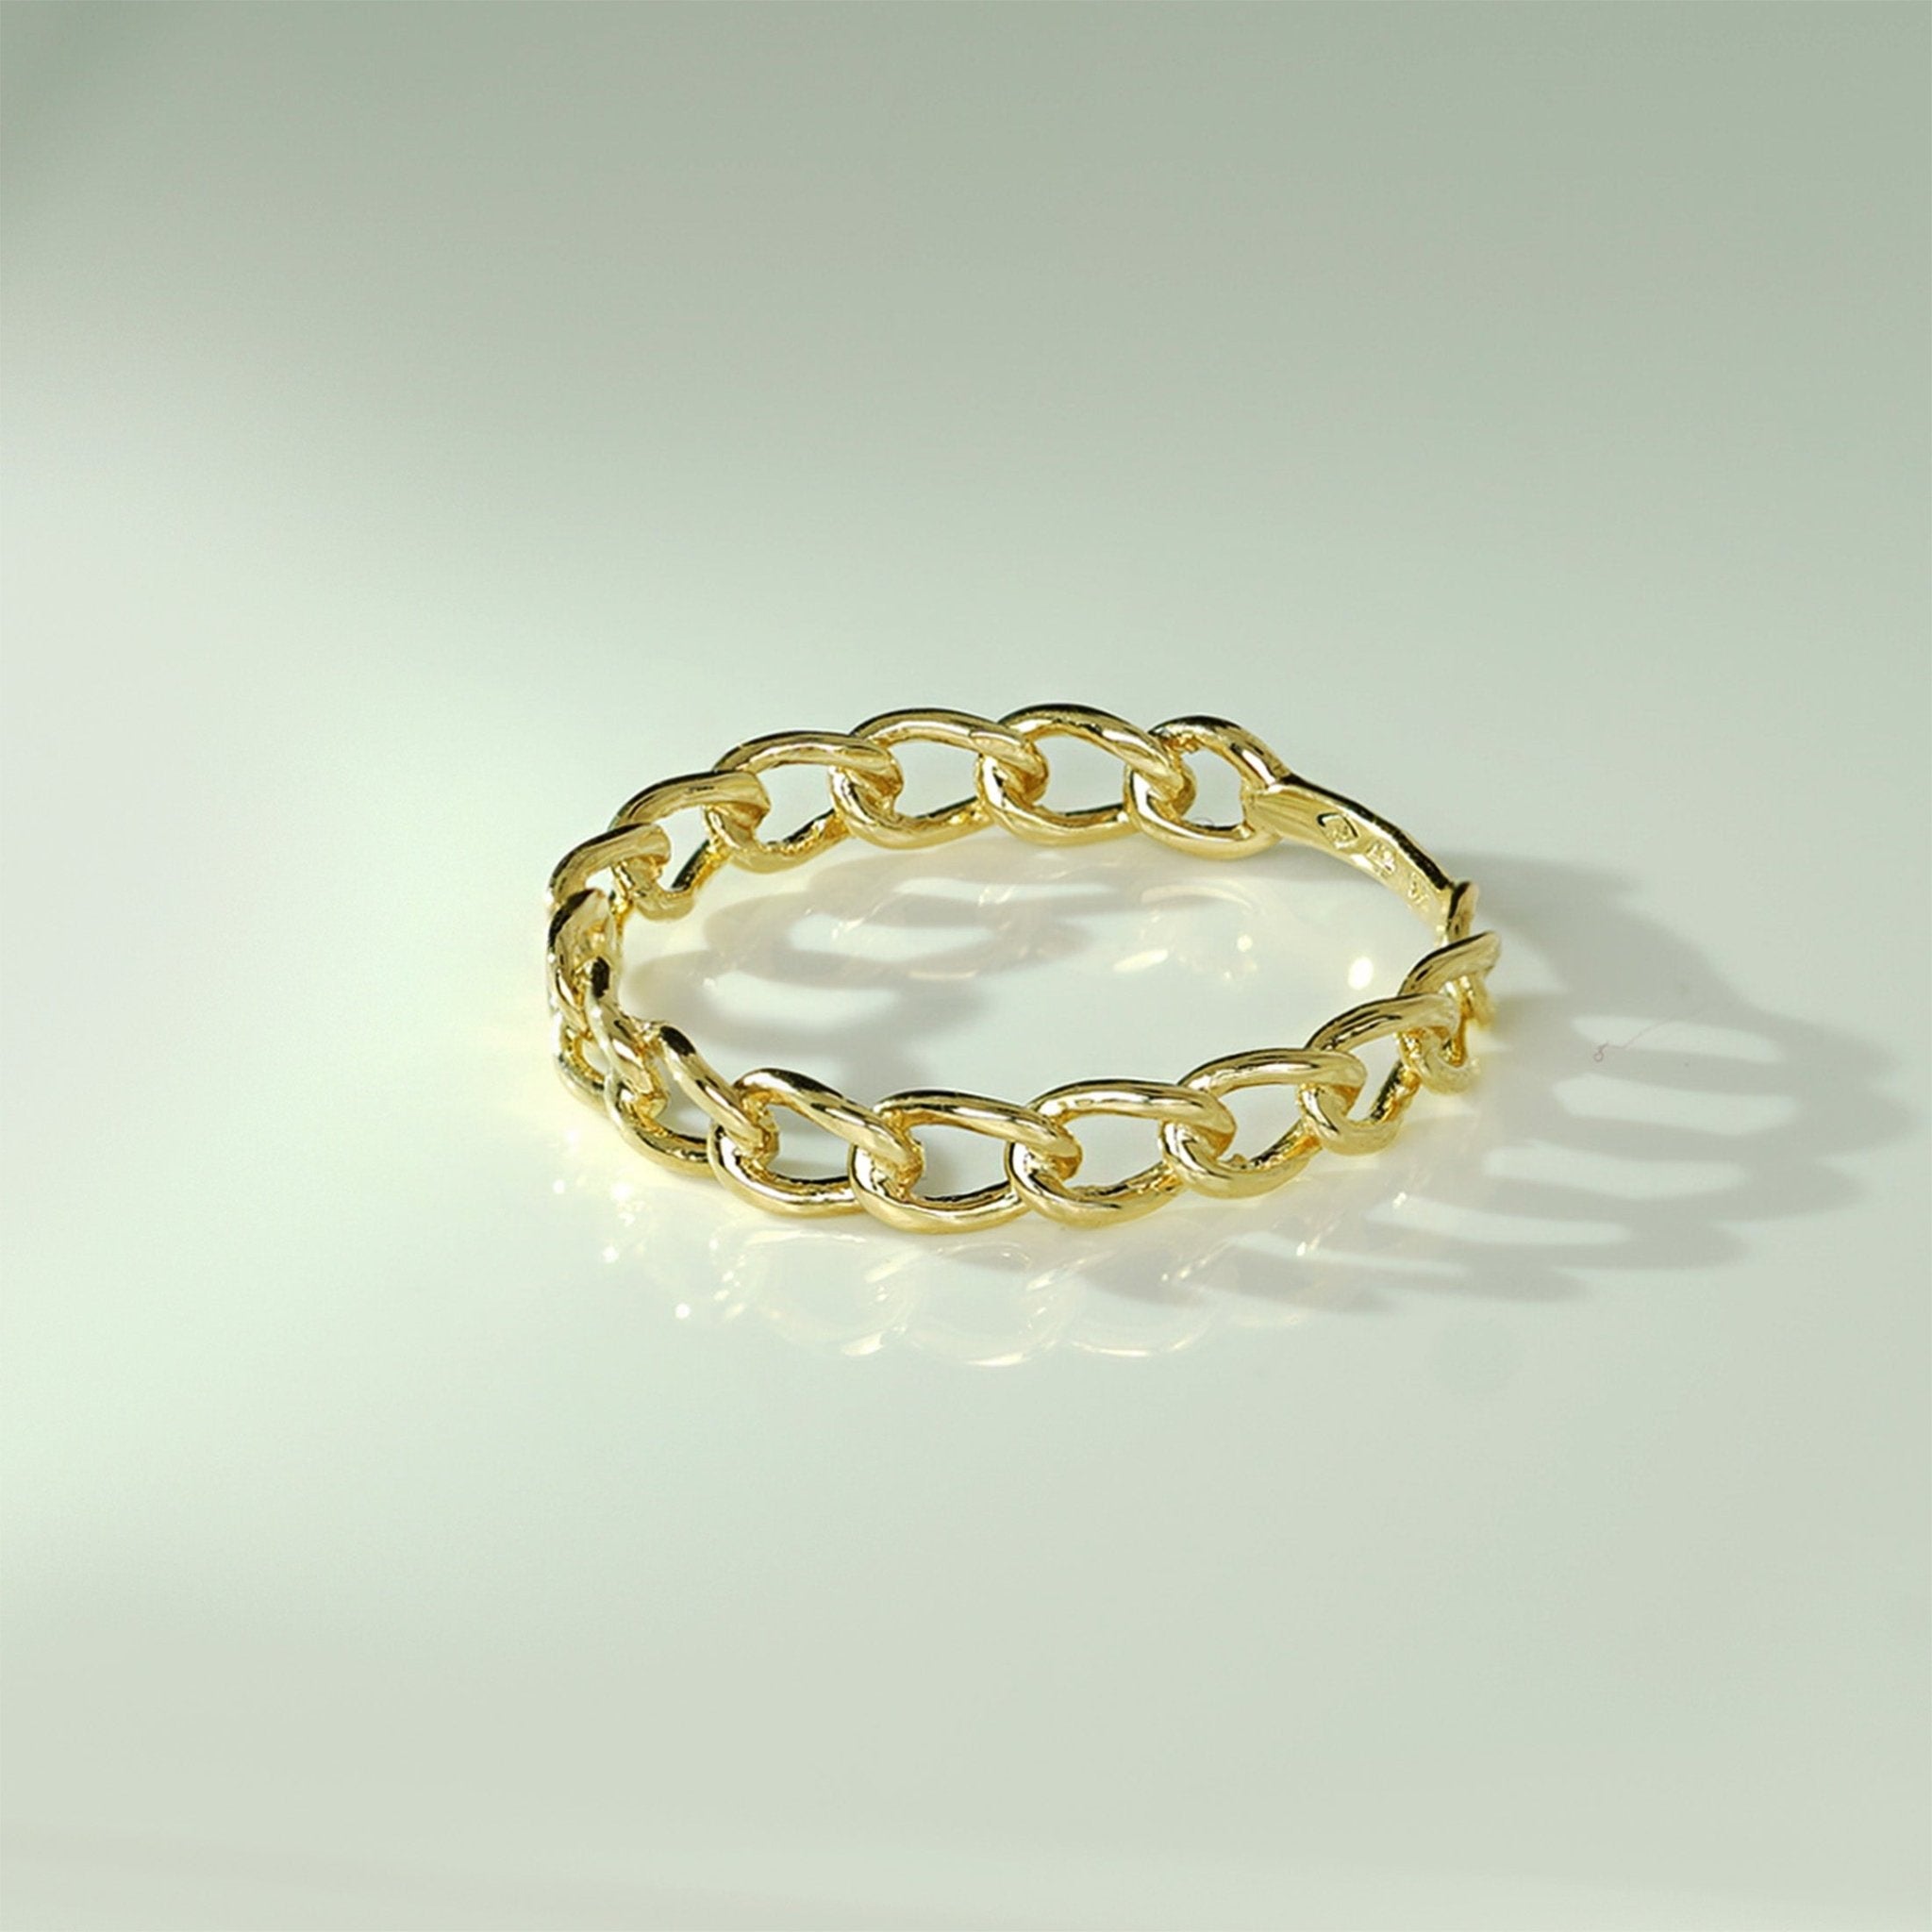 Buy Gold Rings for Women by Pinapes Online | Ajio.com